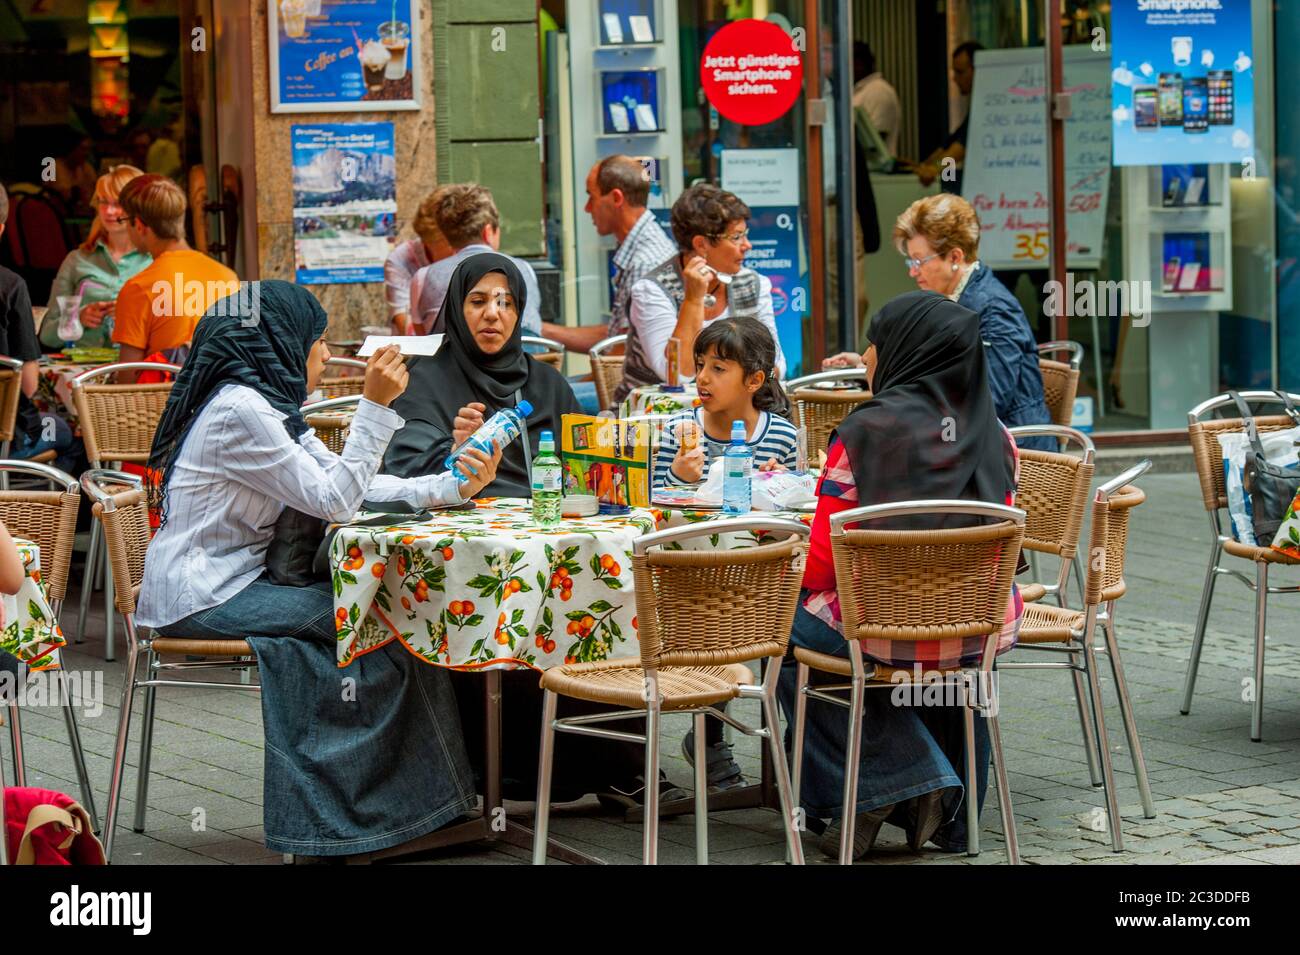 A Muslim family is having water and ice-cream in a sidewalk cafe in Bonn, Germany. Stock Photo